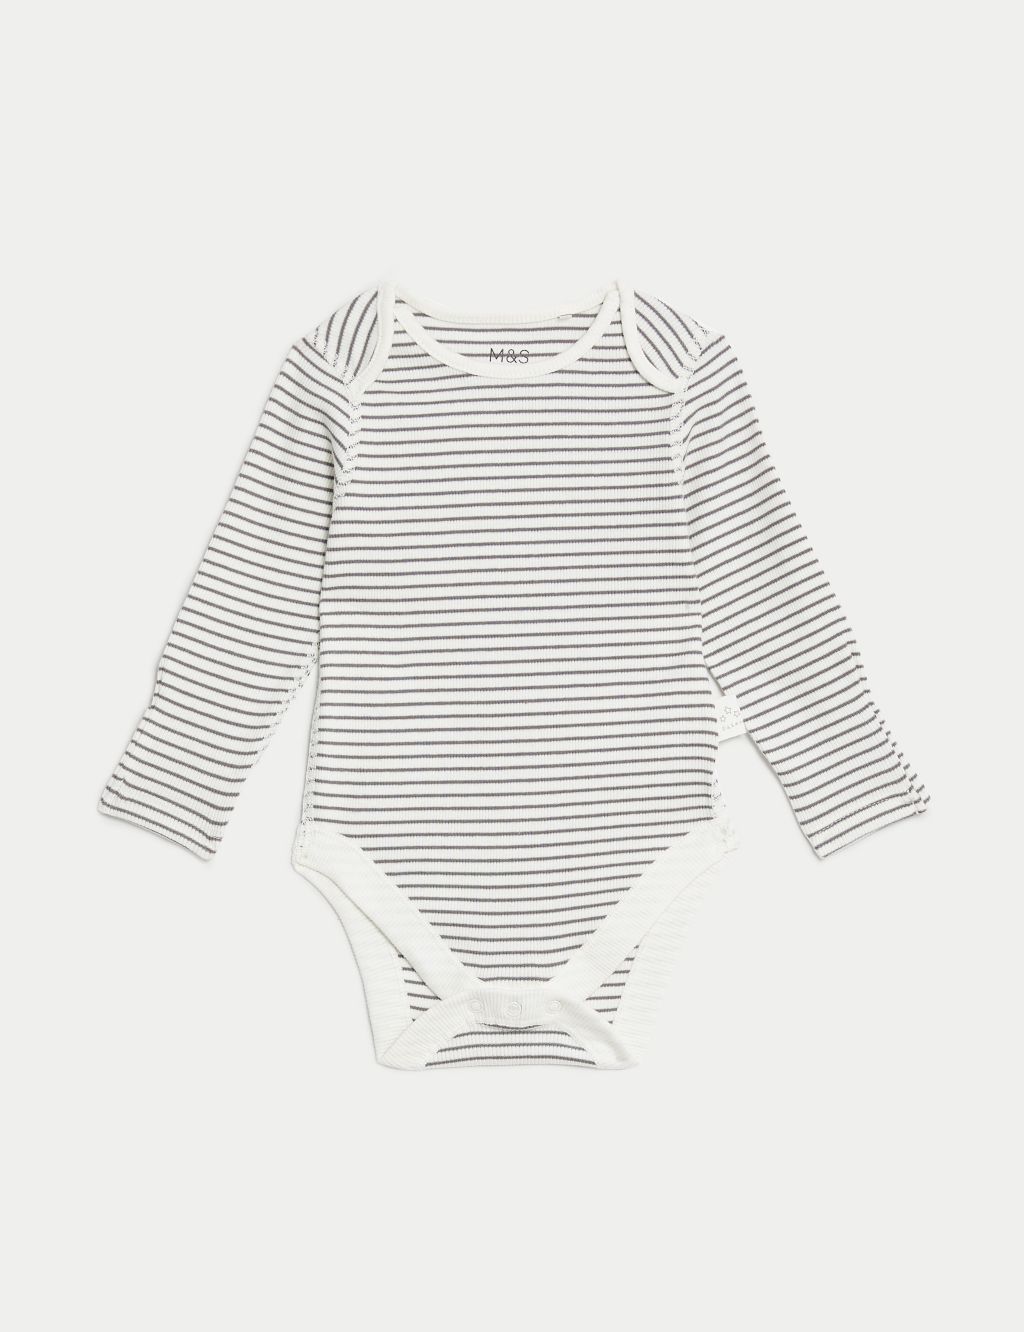 2pc Cotton Rich Striped Outfit (0-1 Yrs) image 2